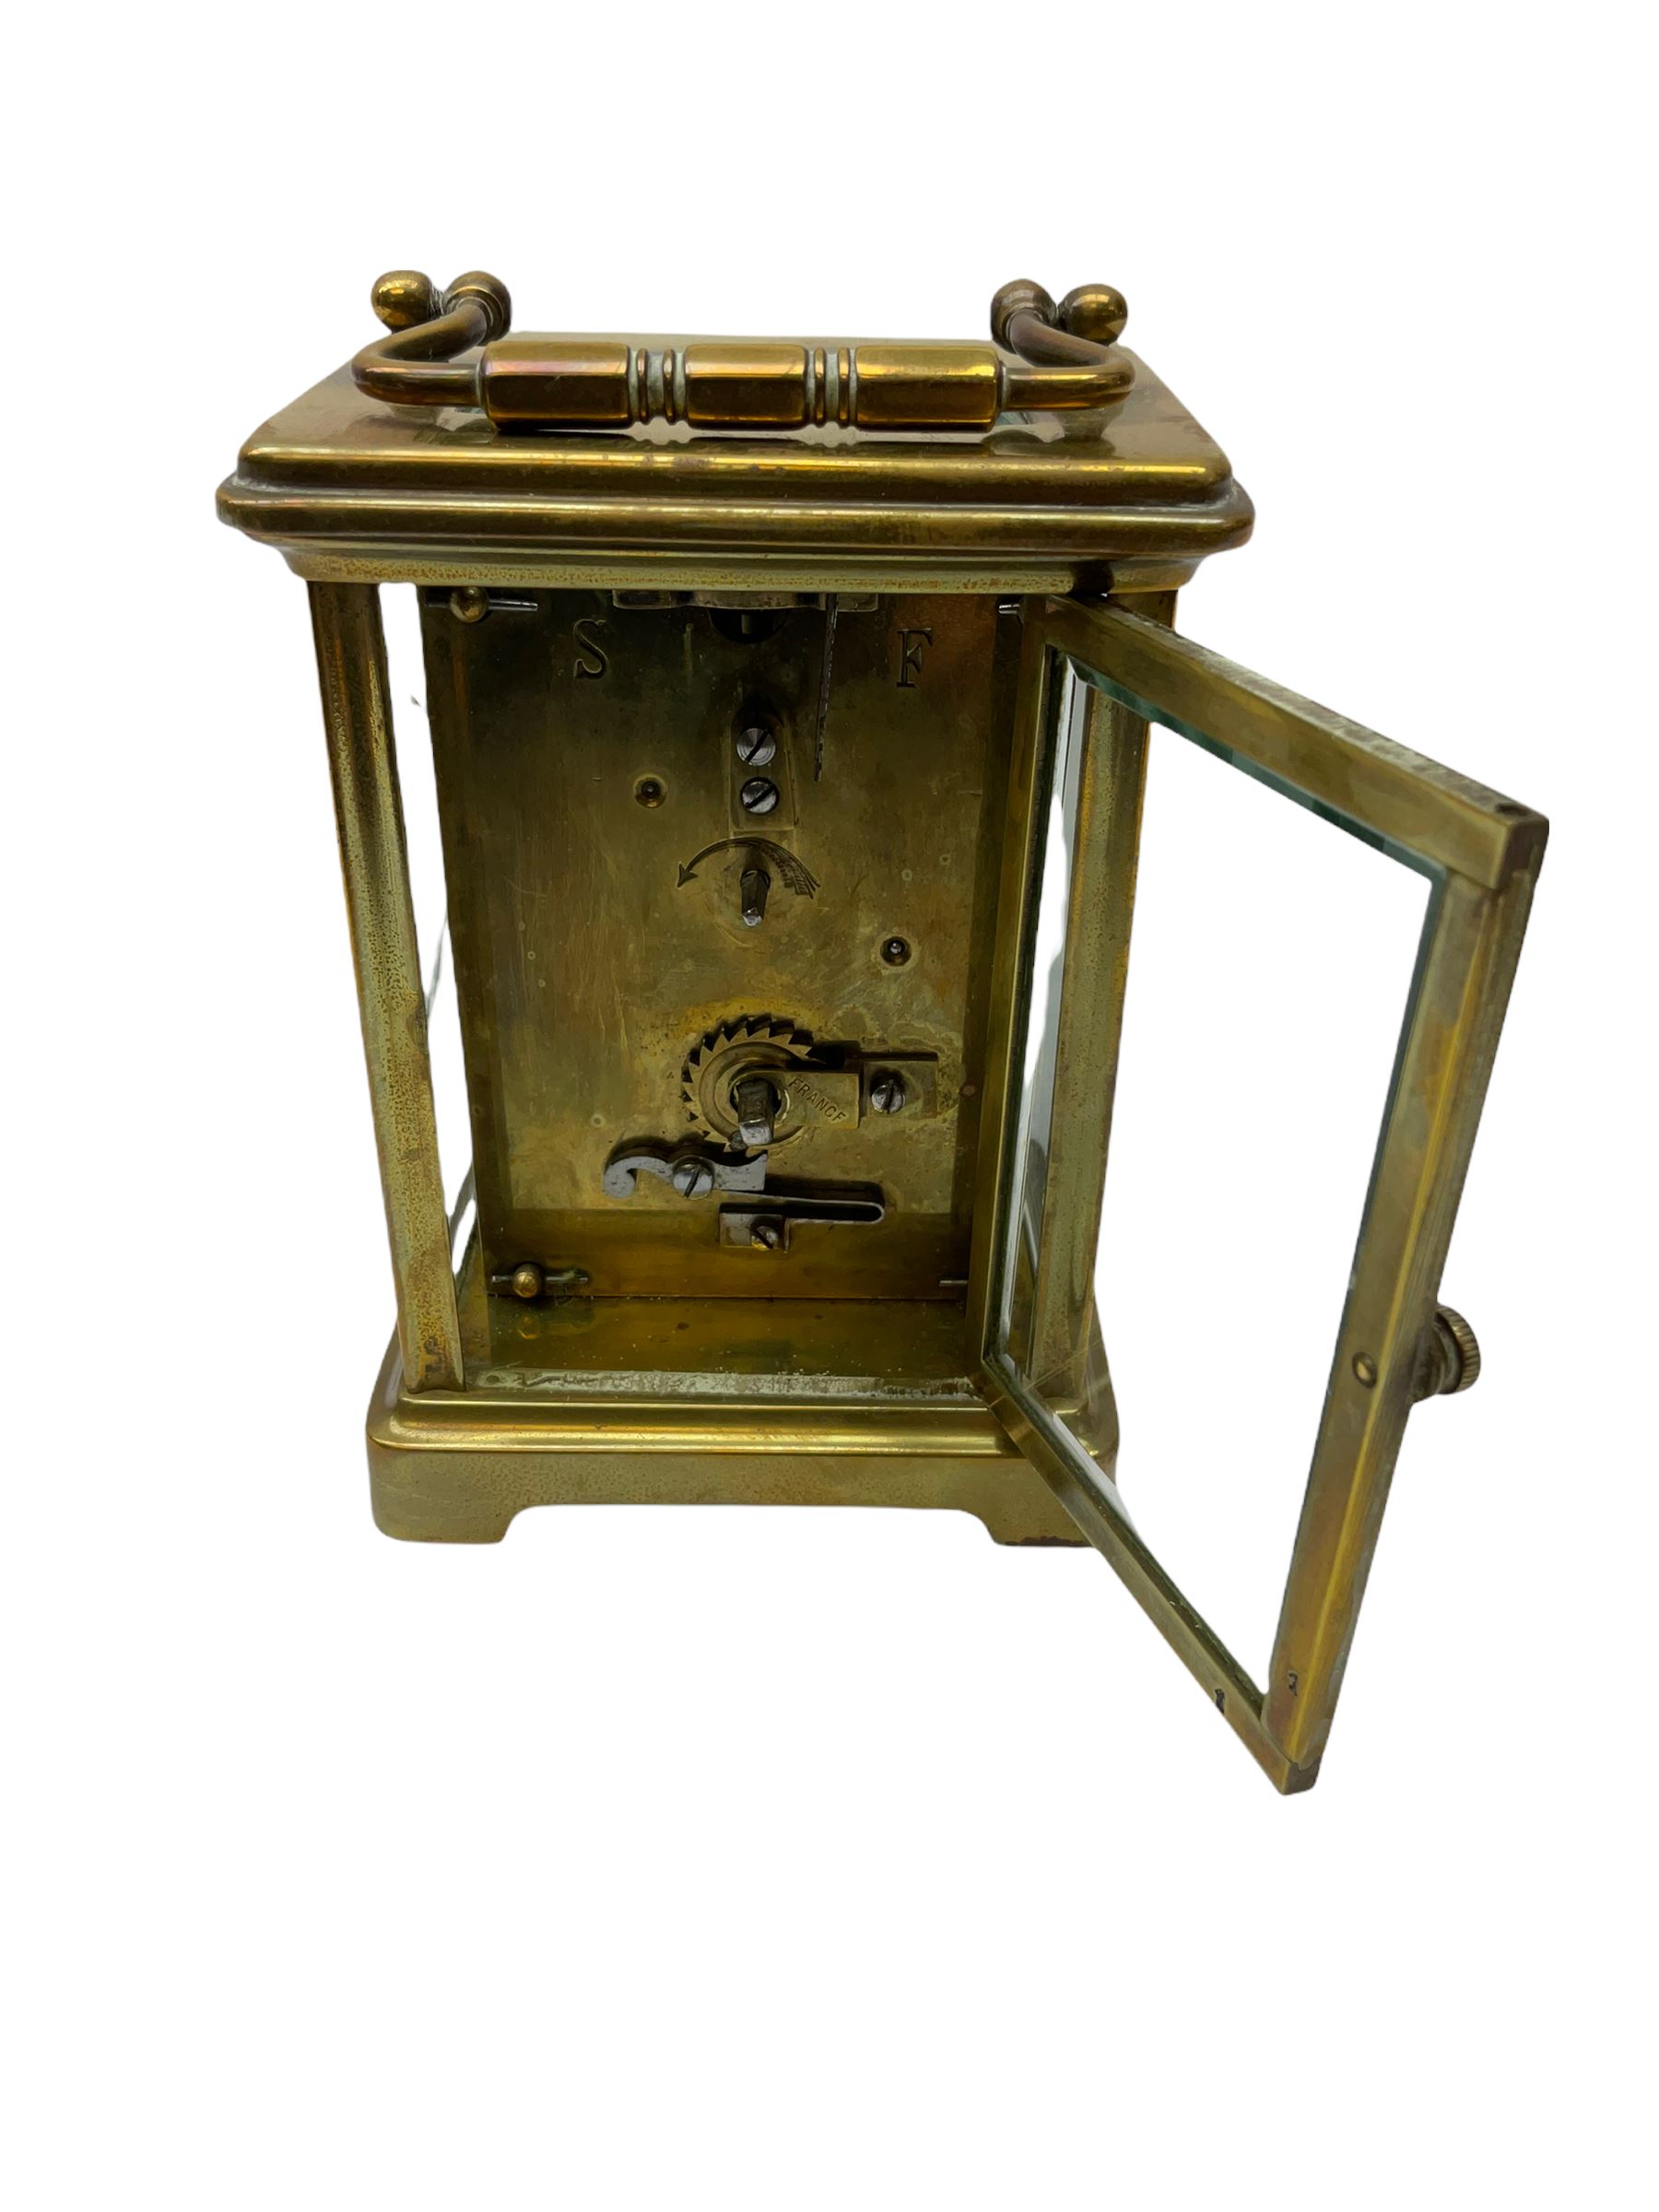 A Corniche cased 20th century timepiece carriage clock retailed by Mappin & Webb - Image 3 of 4